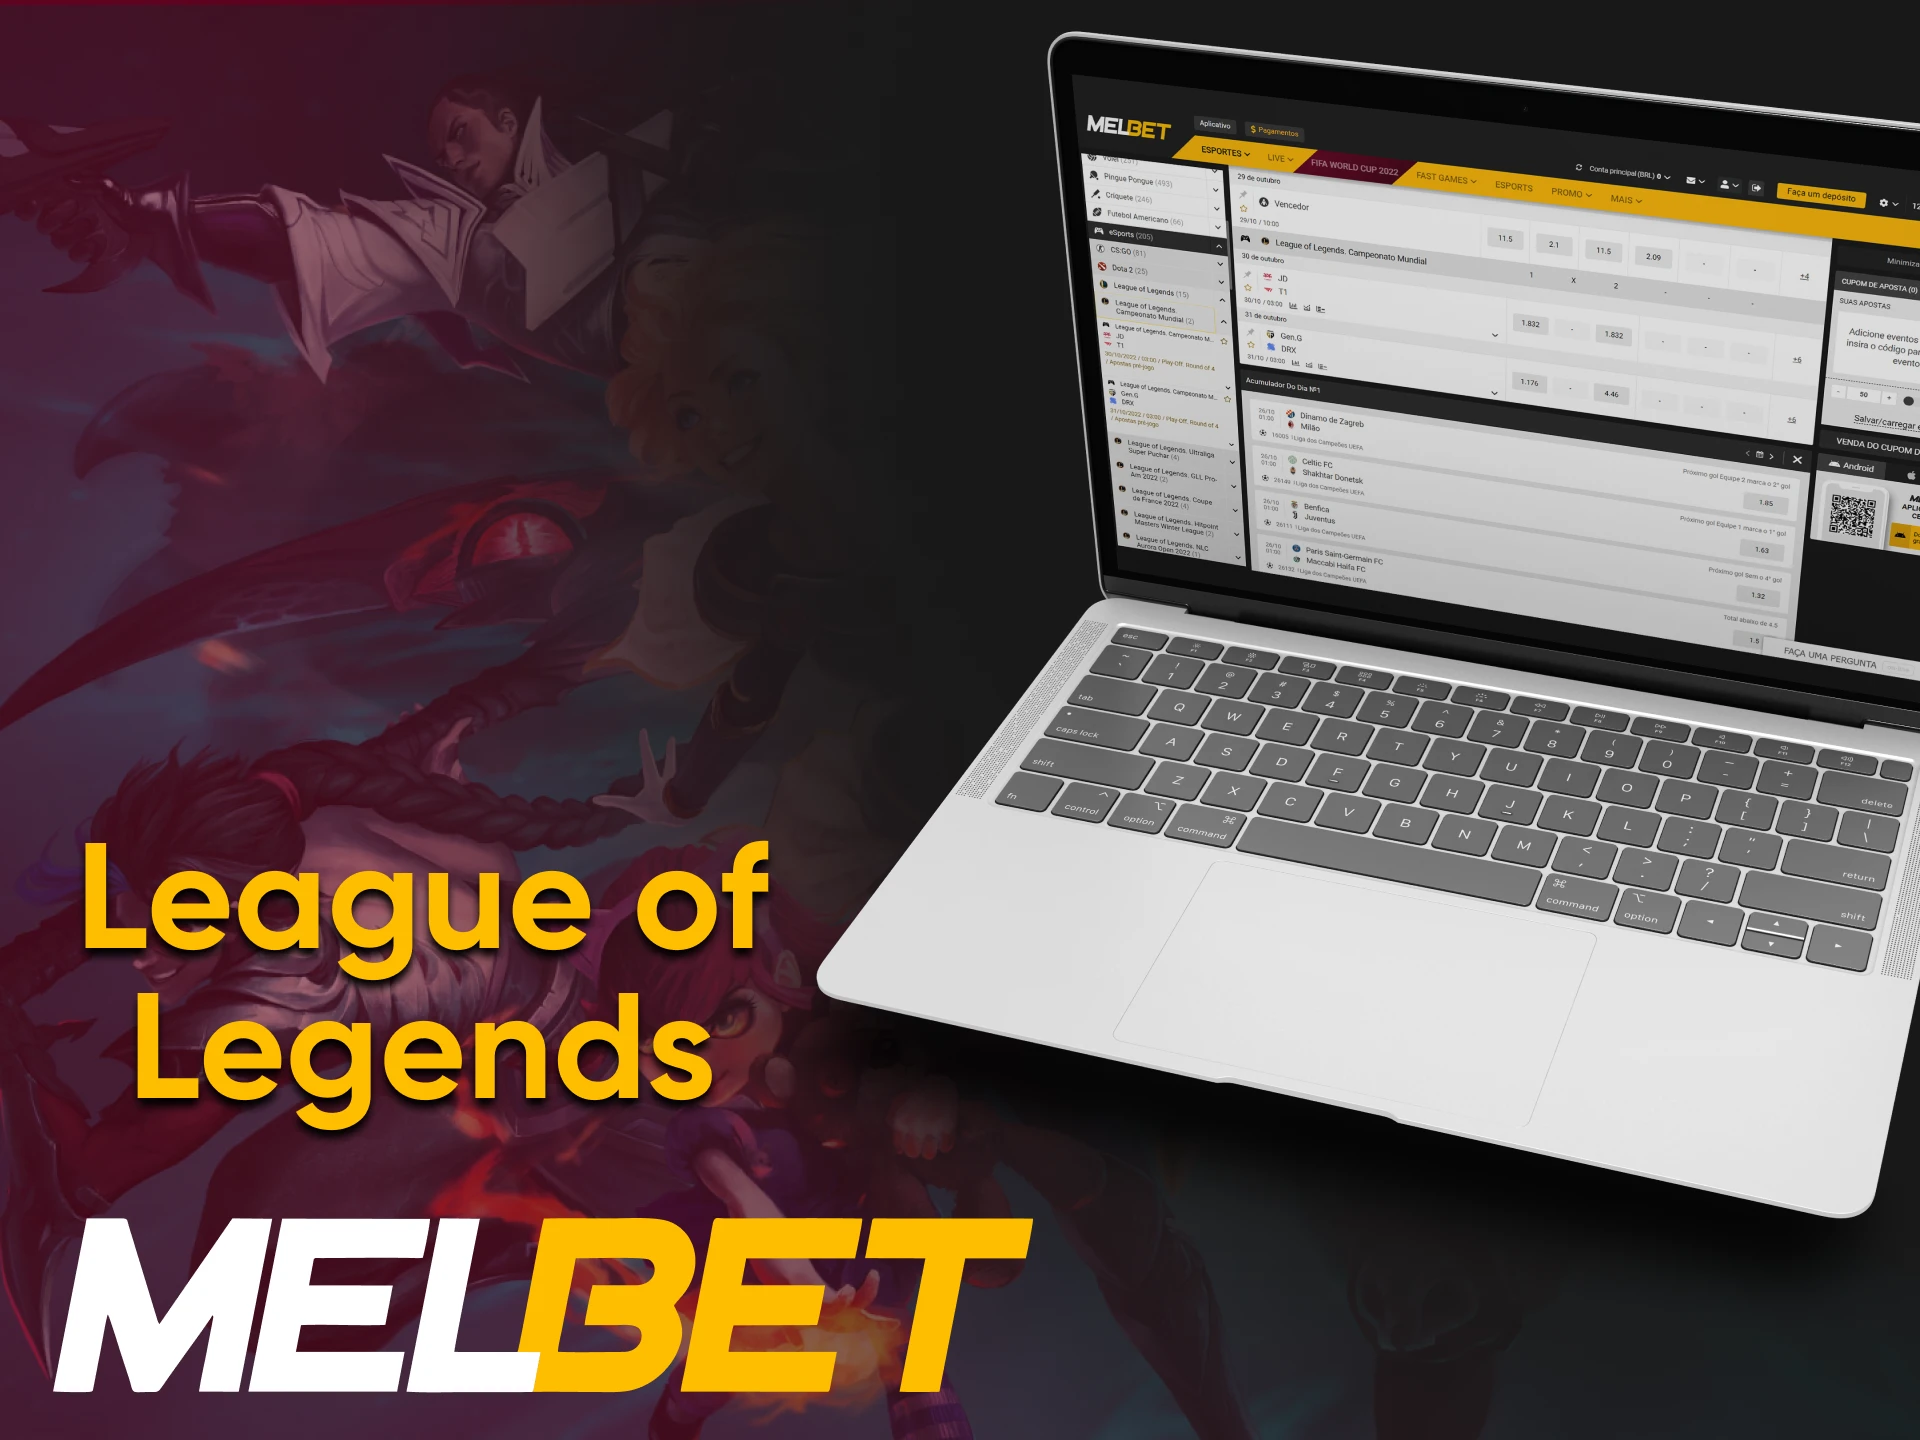 On the Melbet website, you can play League of Legends.